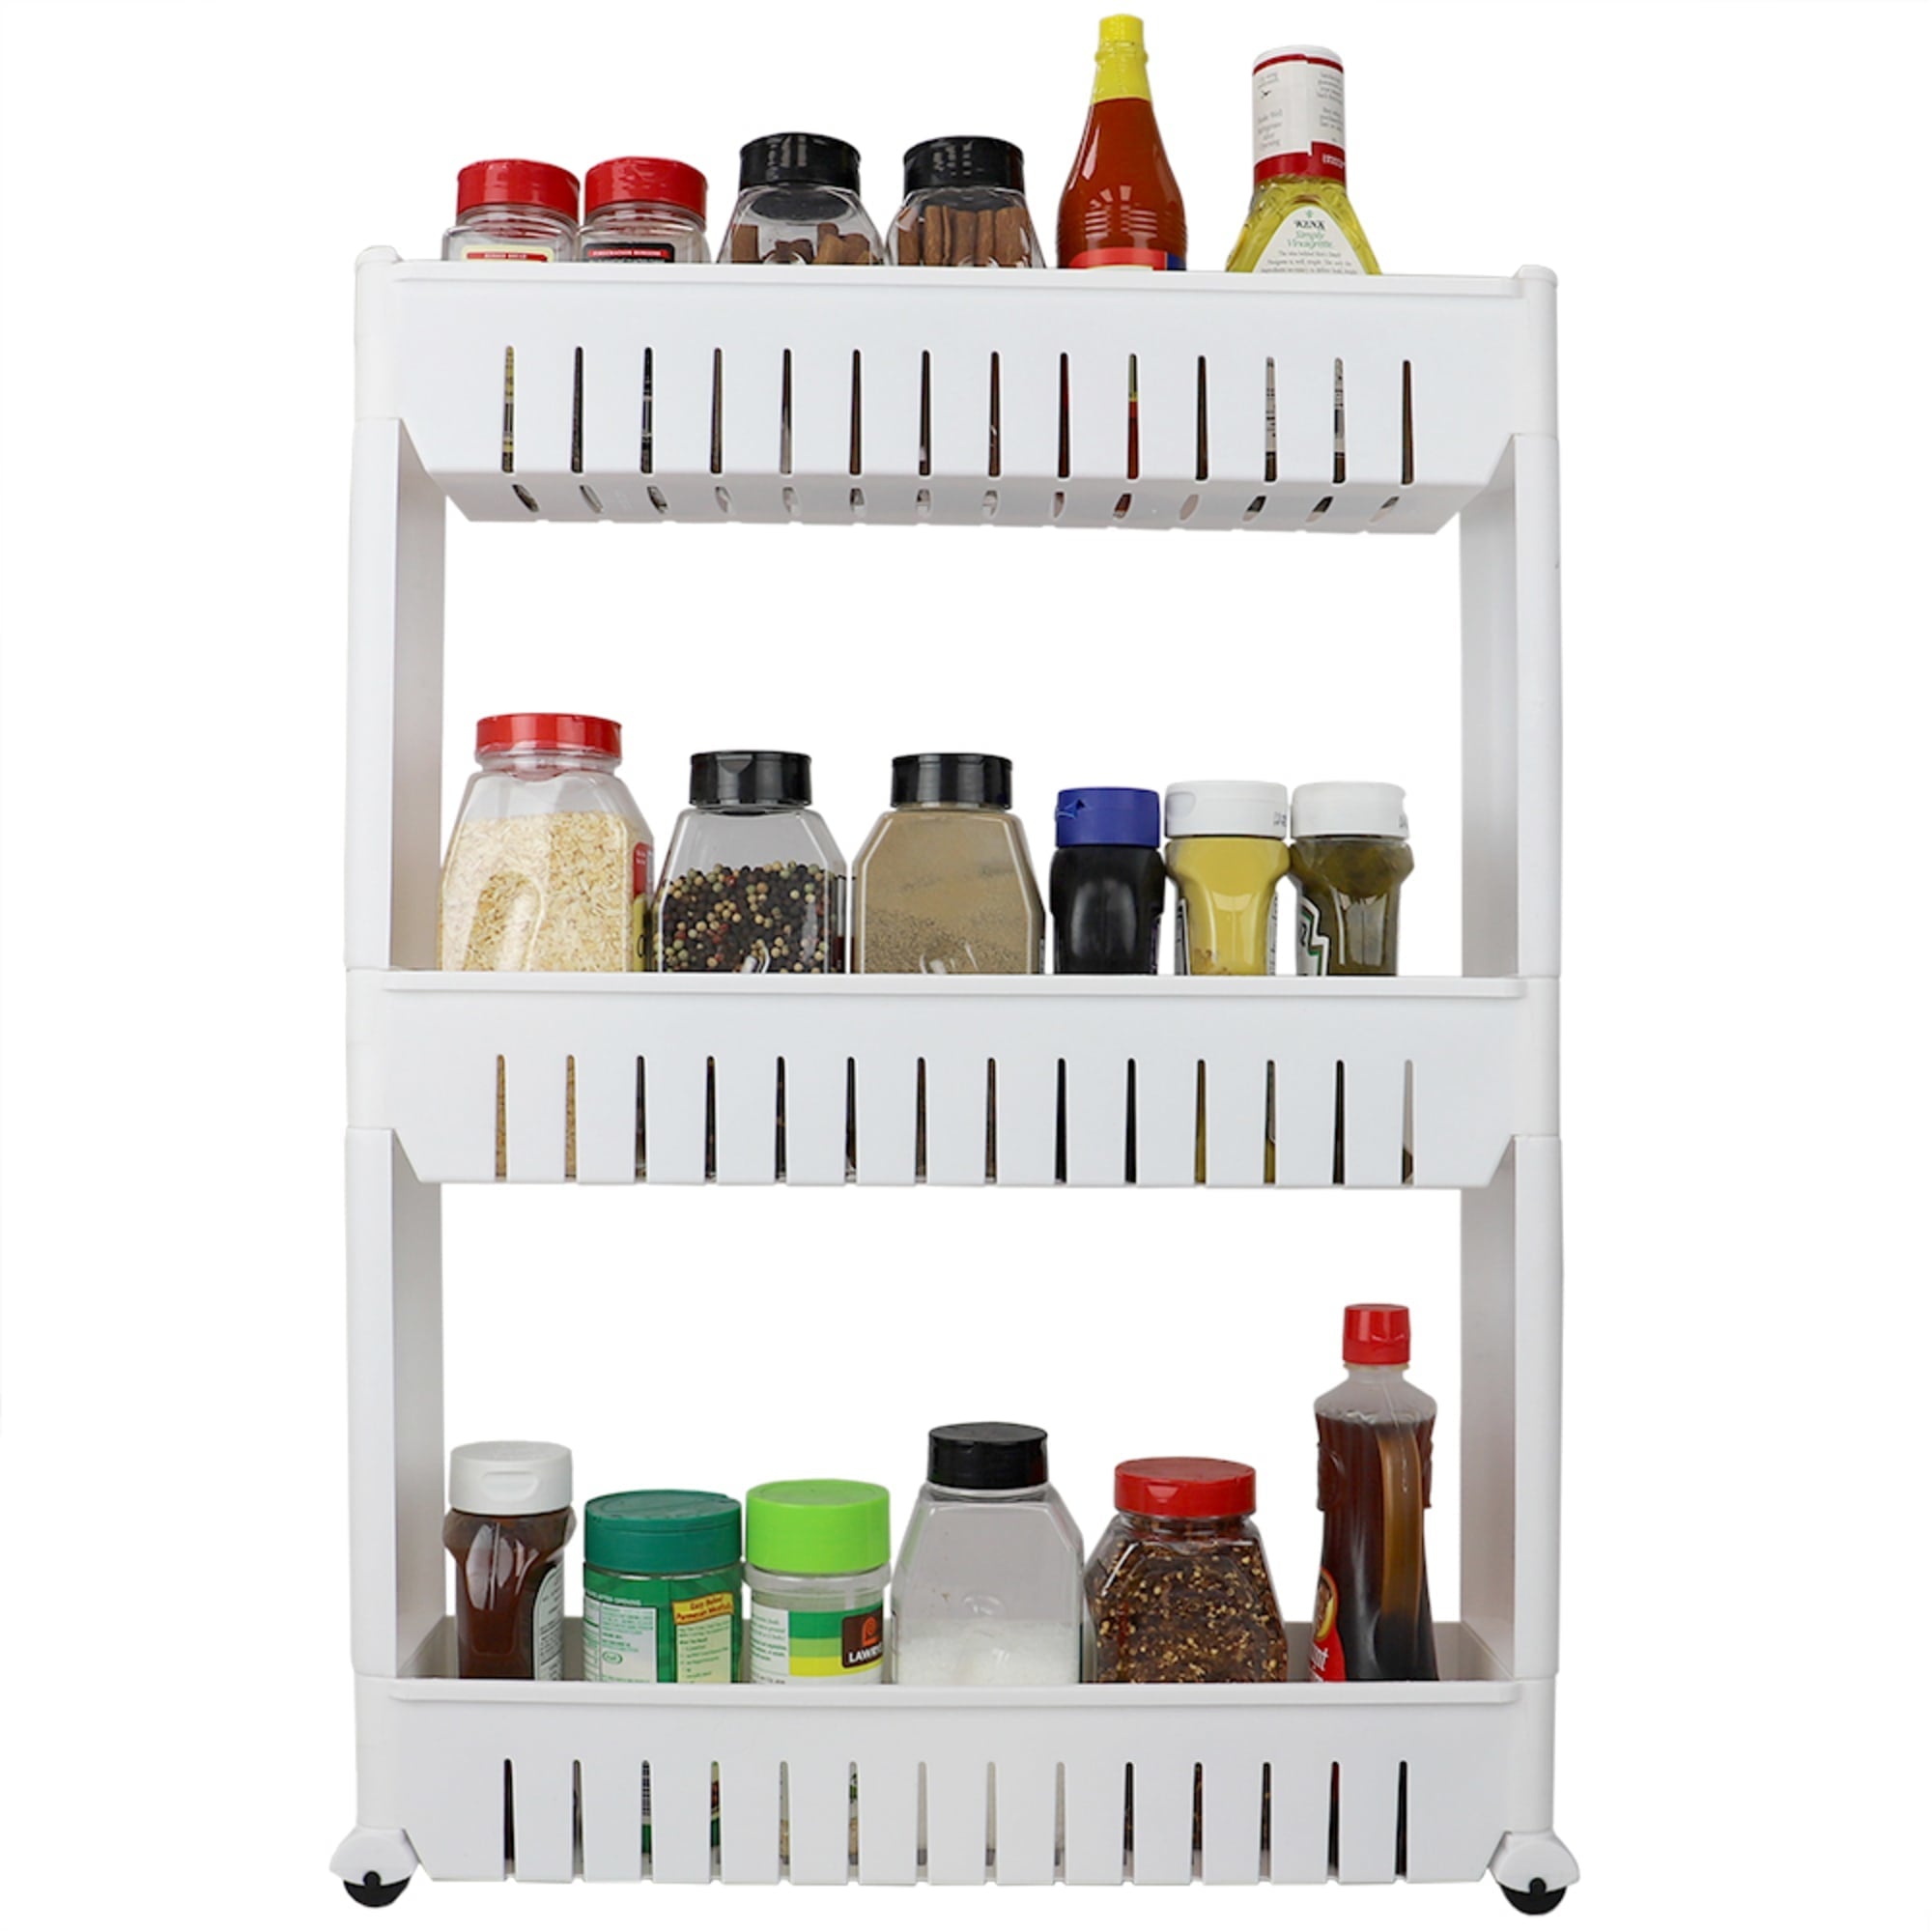 Home Basics 3 Tier Plastic Storage Tower with Wheels, White $12.00 EACH, CASE PACK OF 4